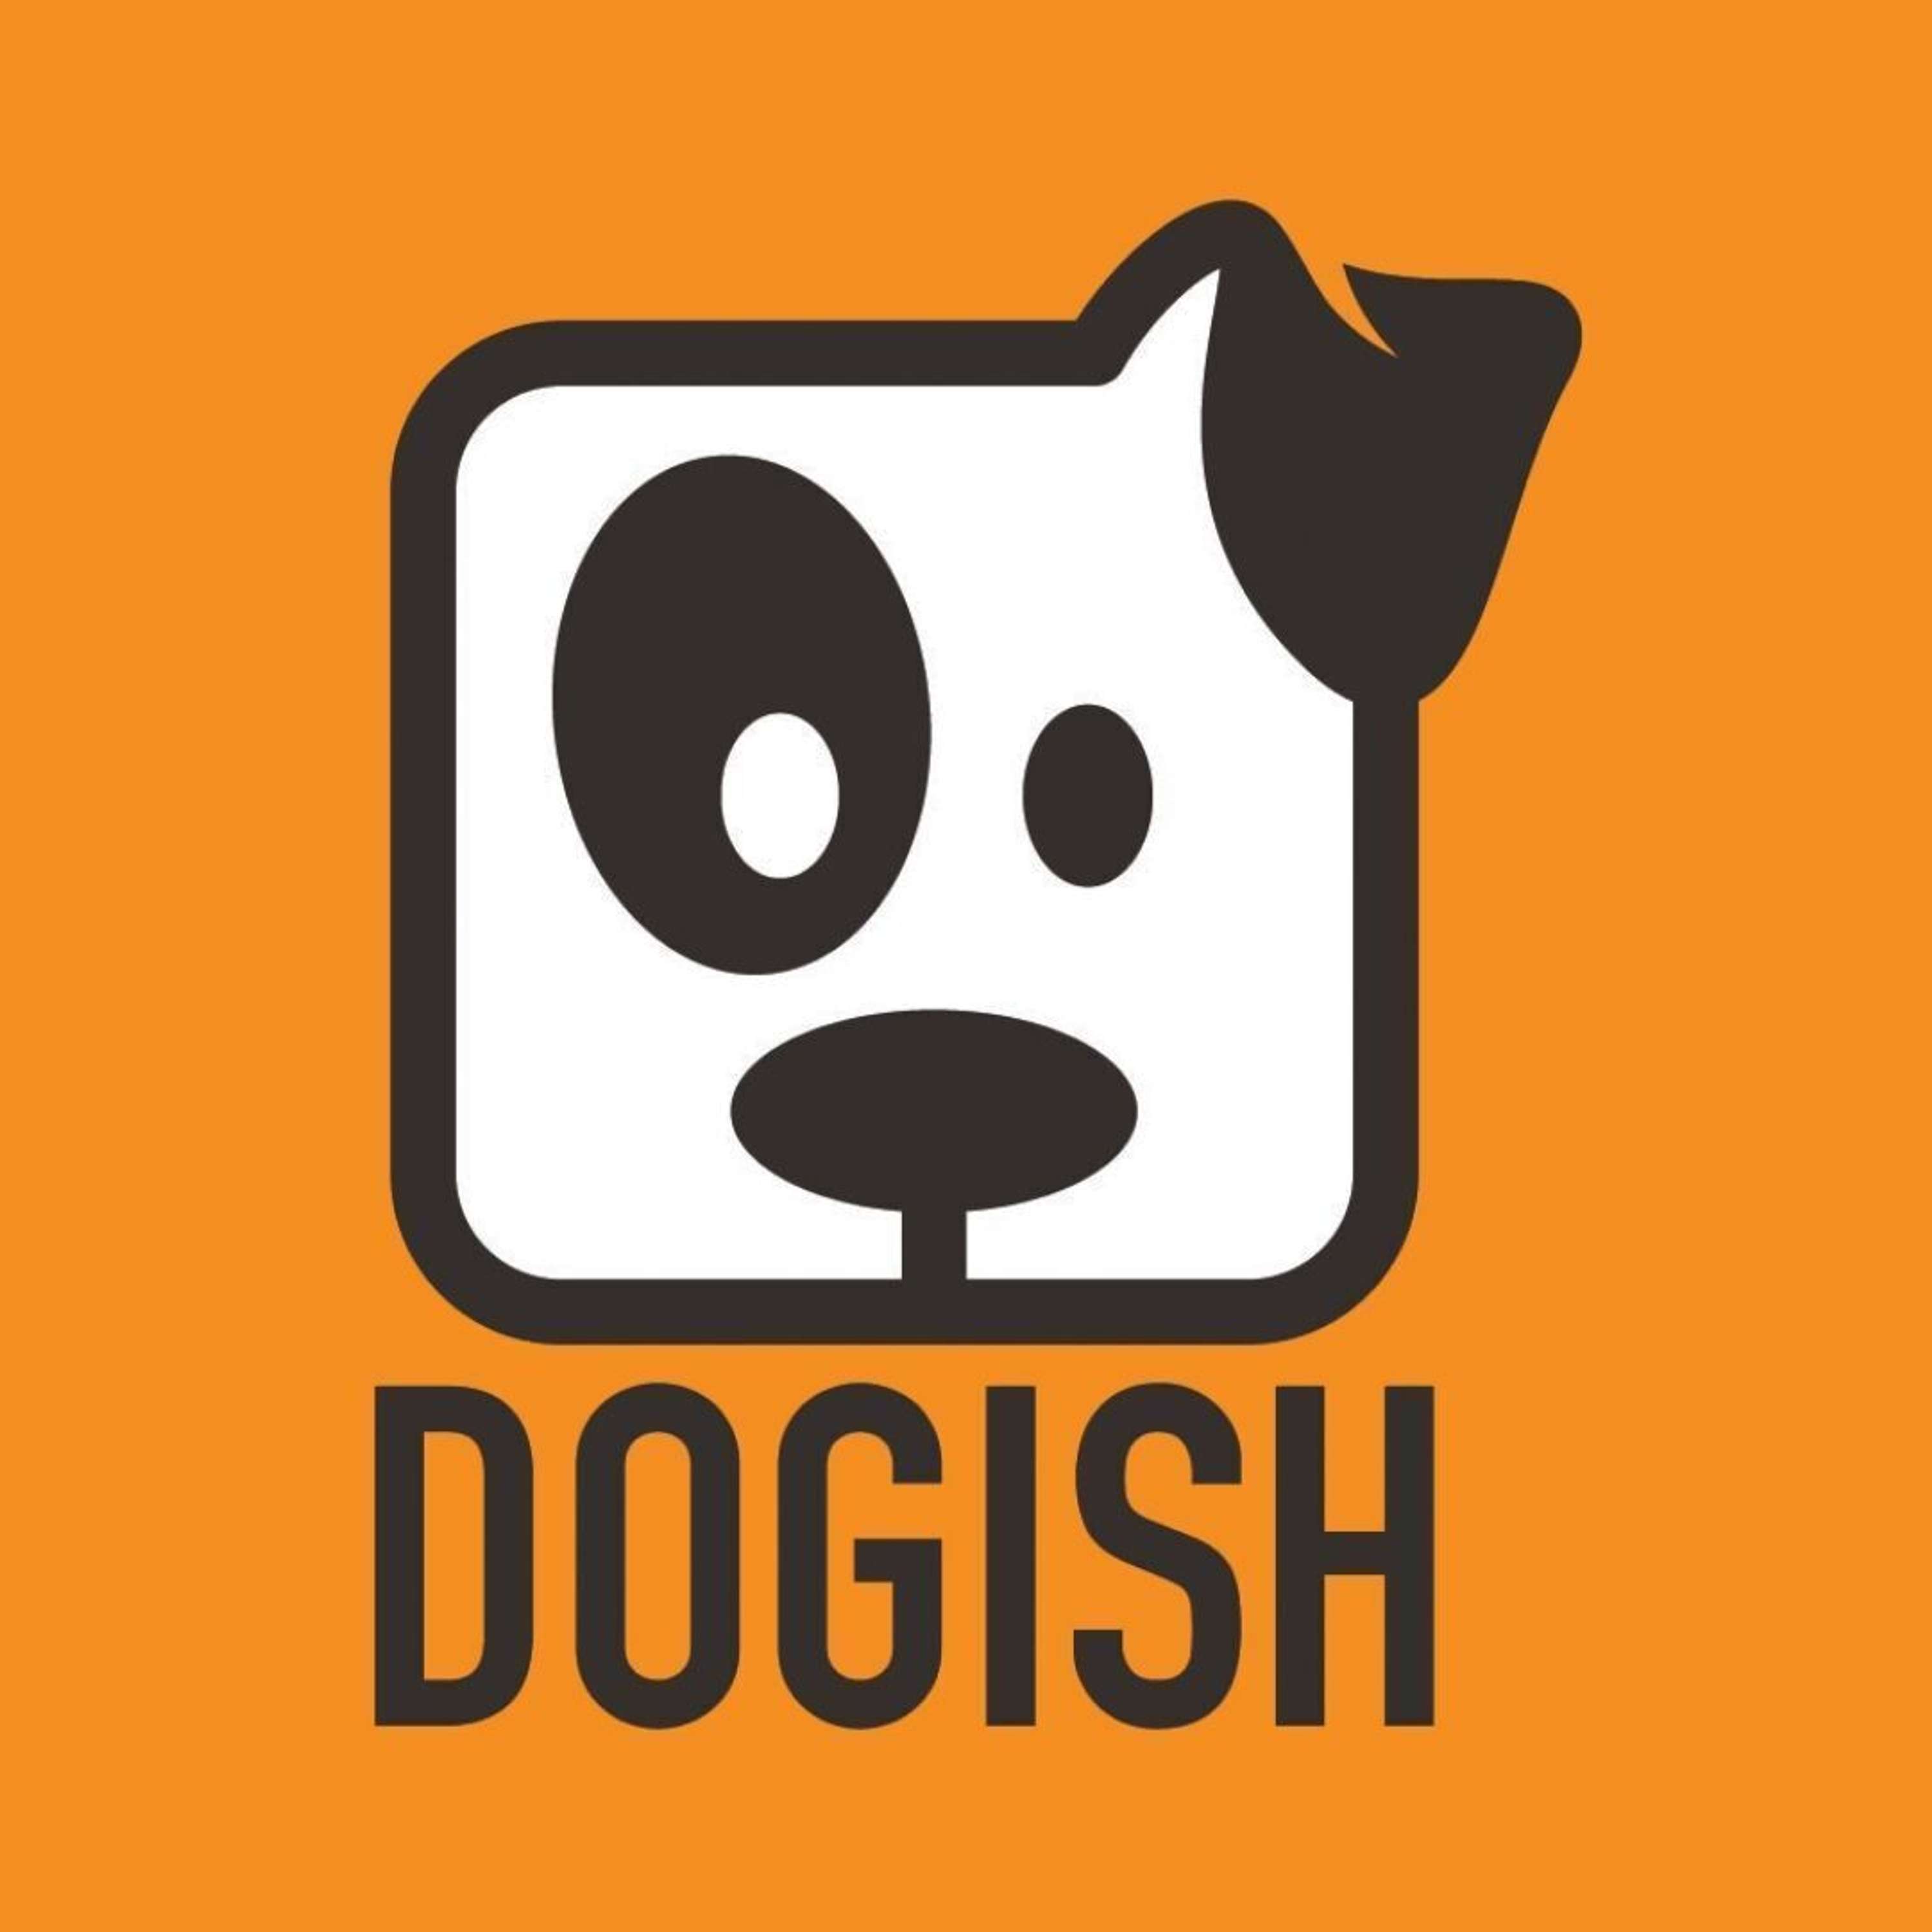 Dogish Podcast - Are You & Your Dog Prepared For The Worst? with Mary Powell 09/07/21